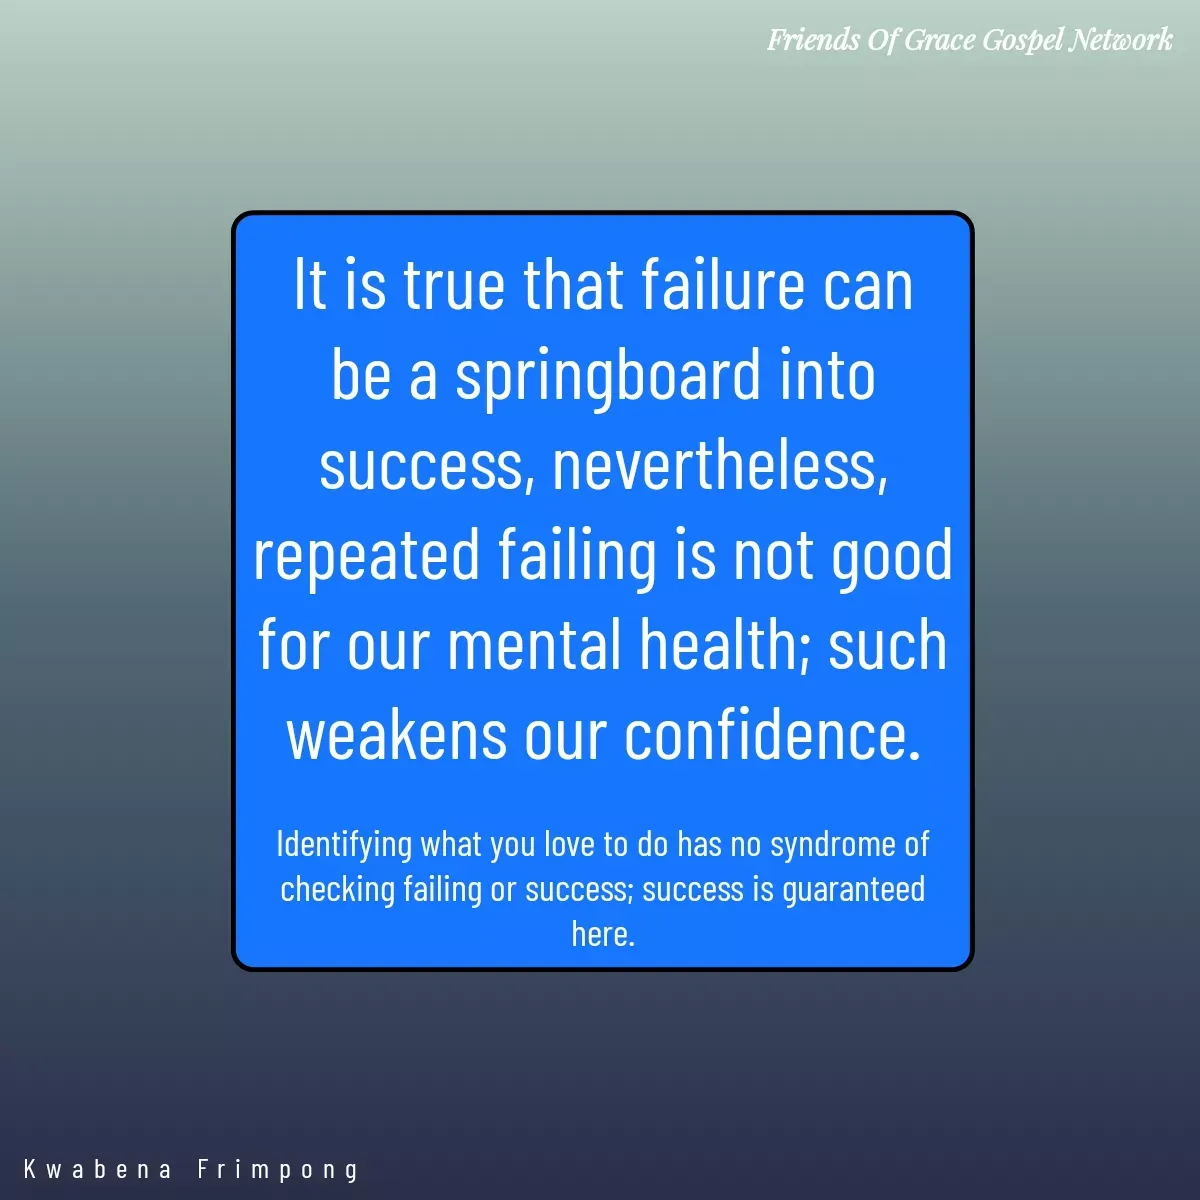 Quote by Afia Asor - It is true that failure can be a springboard into success, nevertheless, repeated failing is not good for our mental health; such weakens our confidence.

Identifying what you love to do has no syndrome of checking failing or success; success is guaranteed here.

Kwabena Frimpong  - Made using Quotes Creator App, Post Maker App